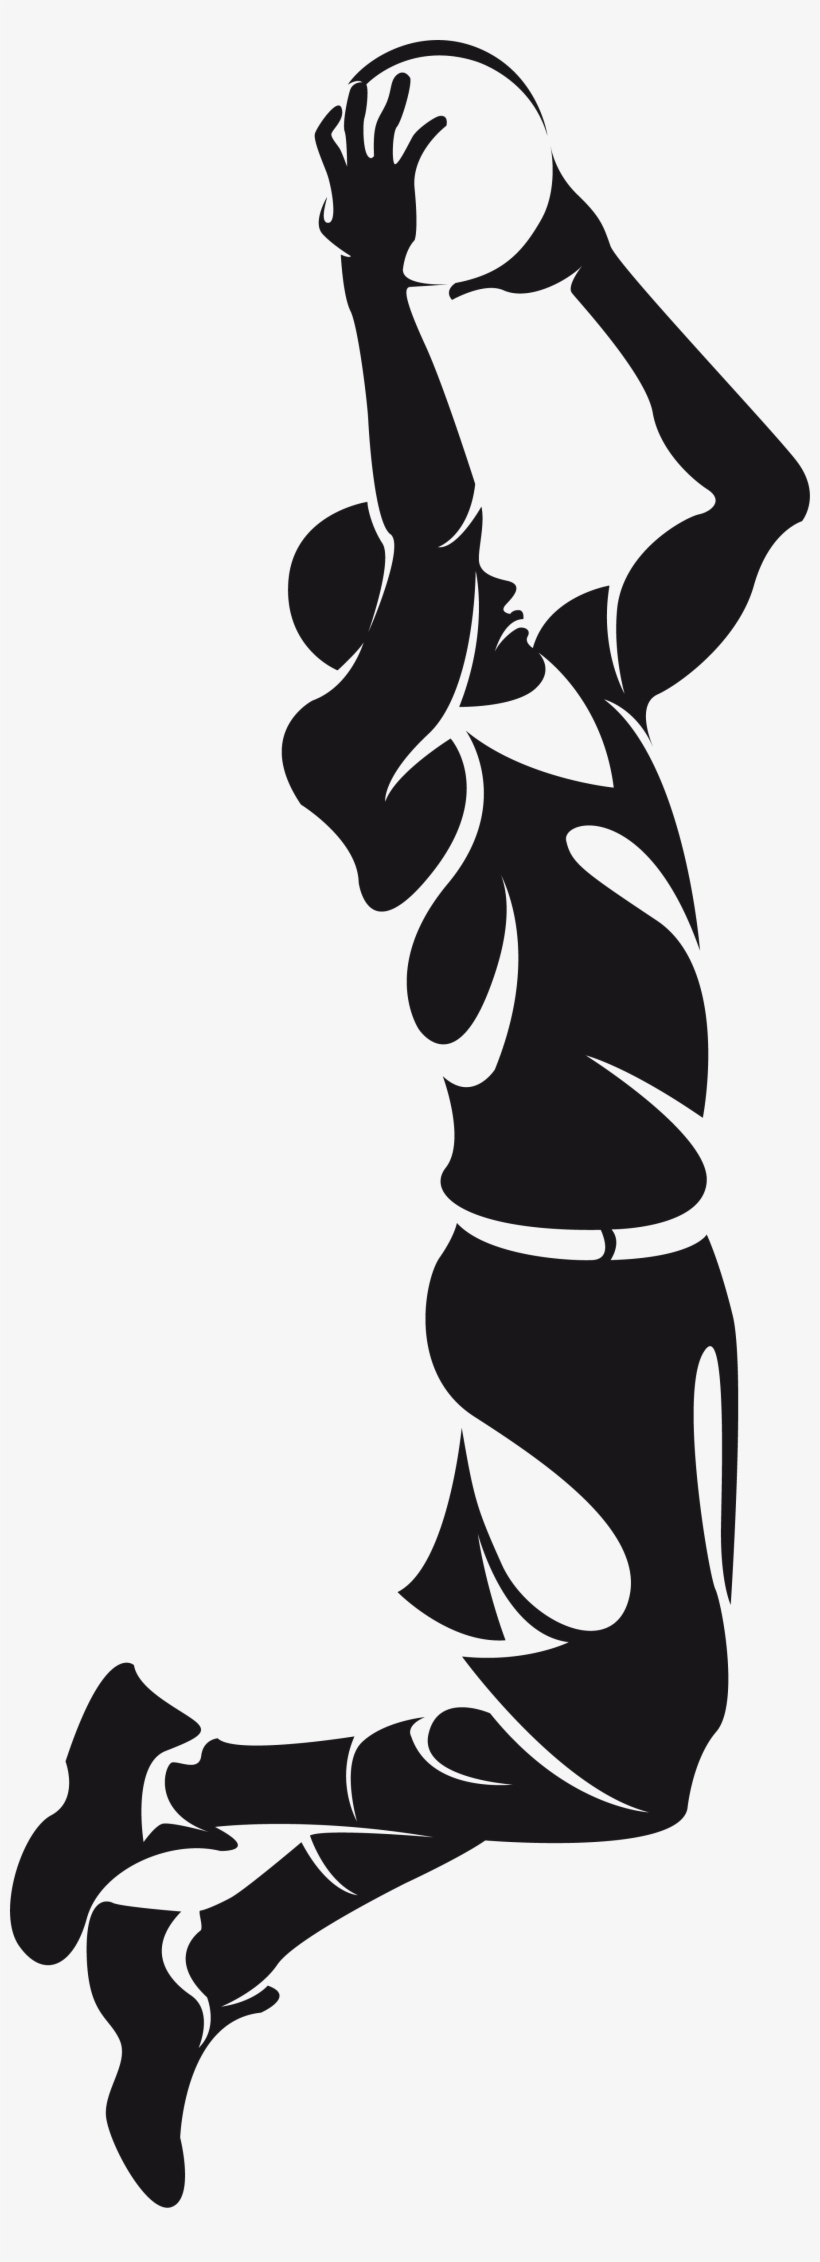 Boys Basketball Clipart Black And White Download - Boys Basketball Clip Art  - Free Transparent PNG Download - PNGkey